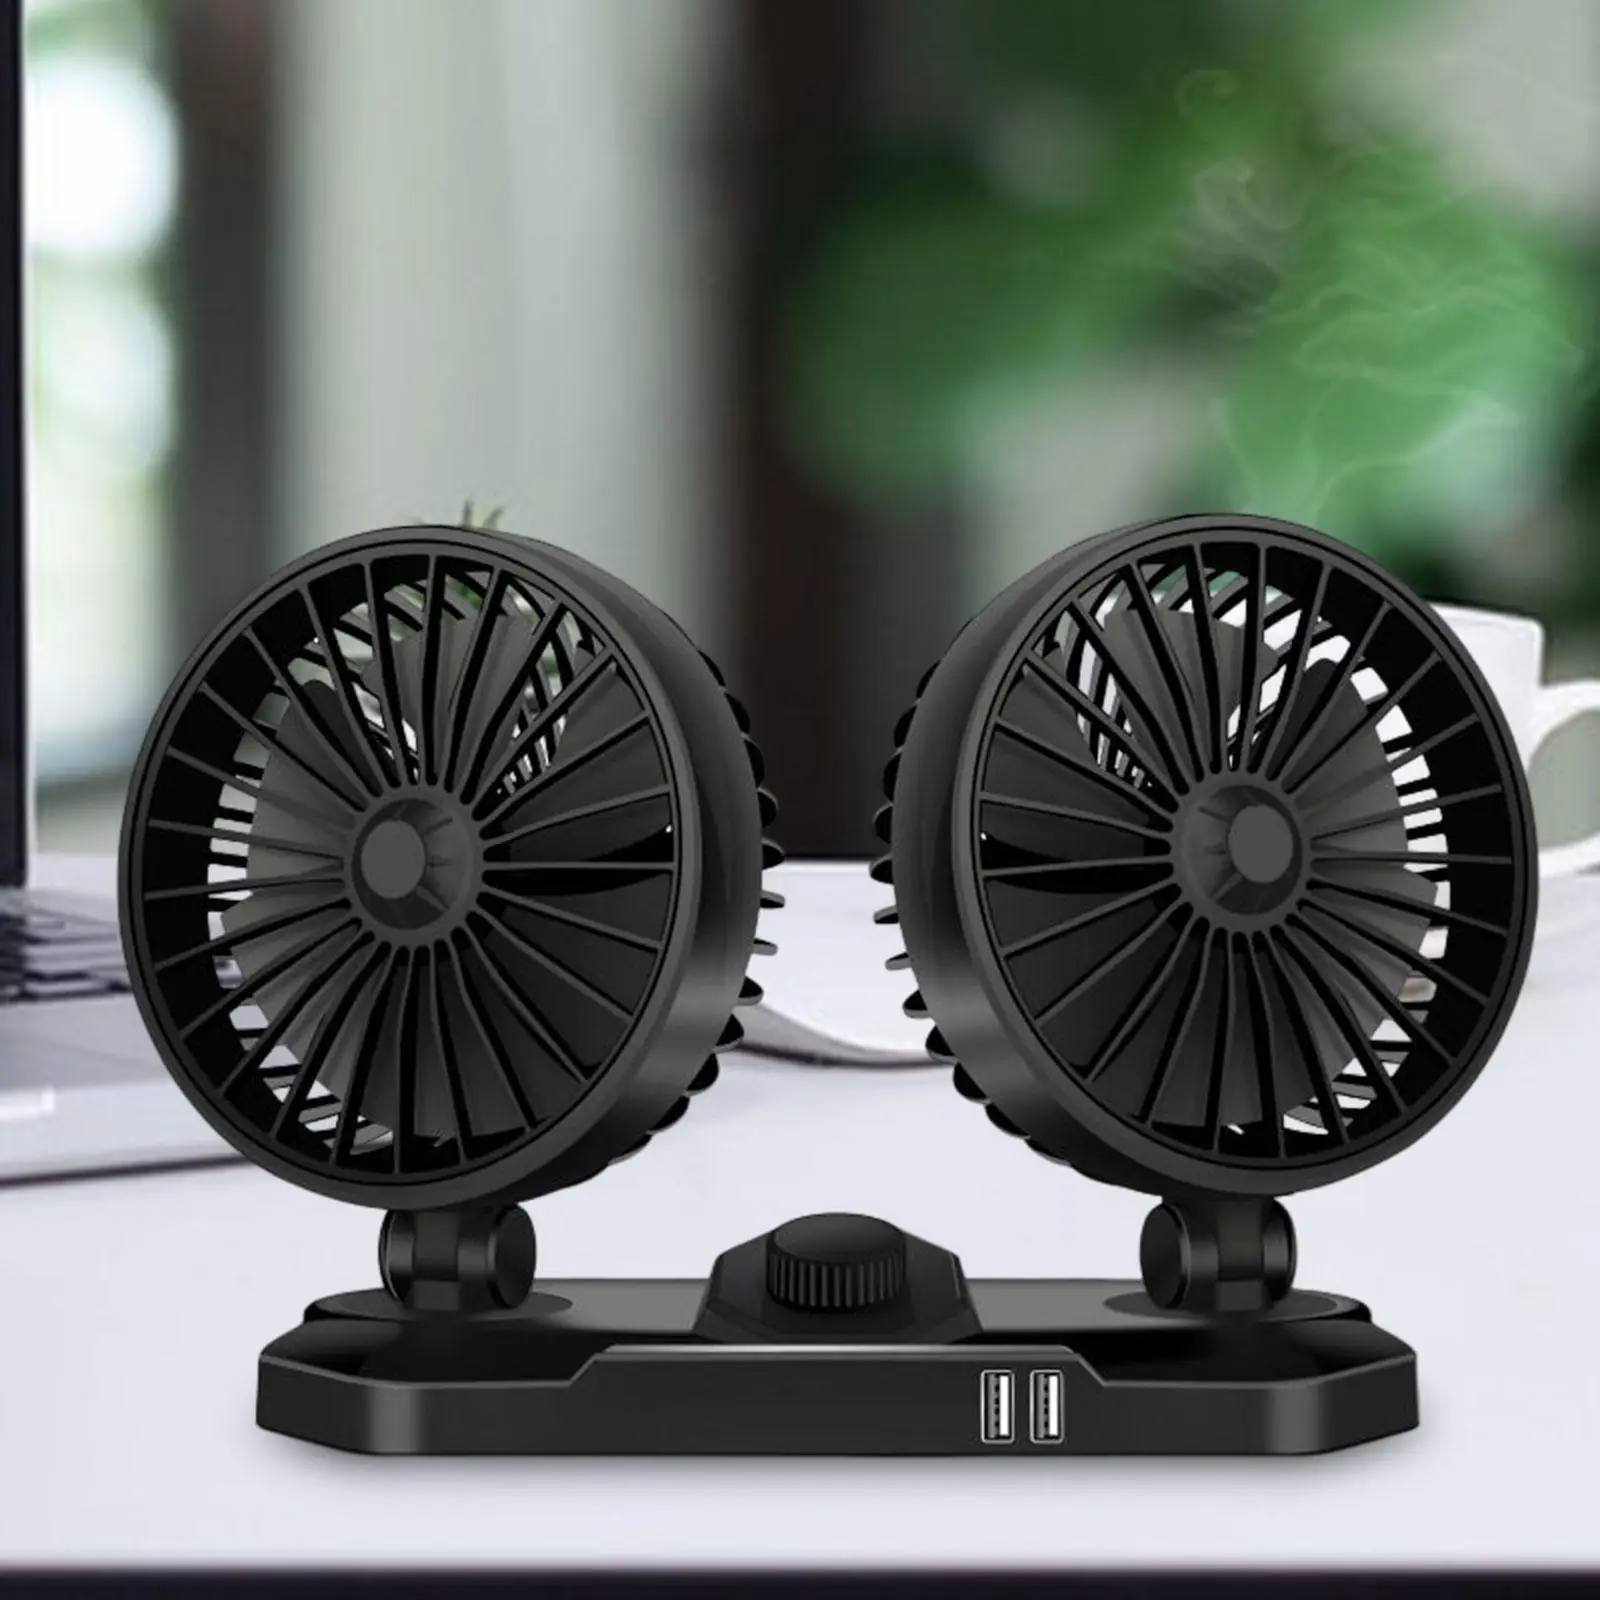 Mini Car Fan Cooling air Fan Strong Wind 360 Degree Rotatable USB for Vehicles Boat Truck Summer Outdoor